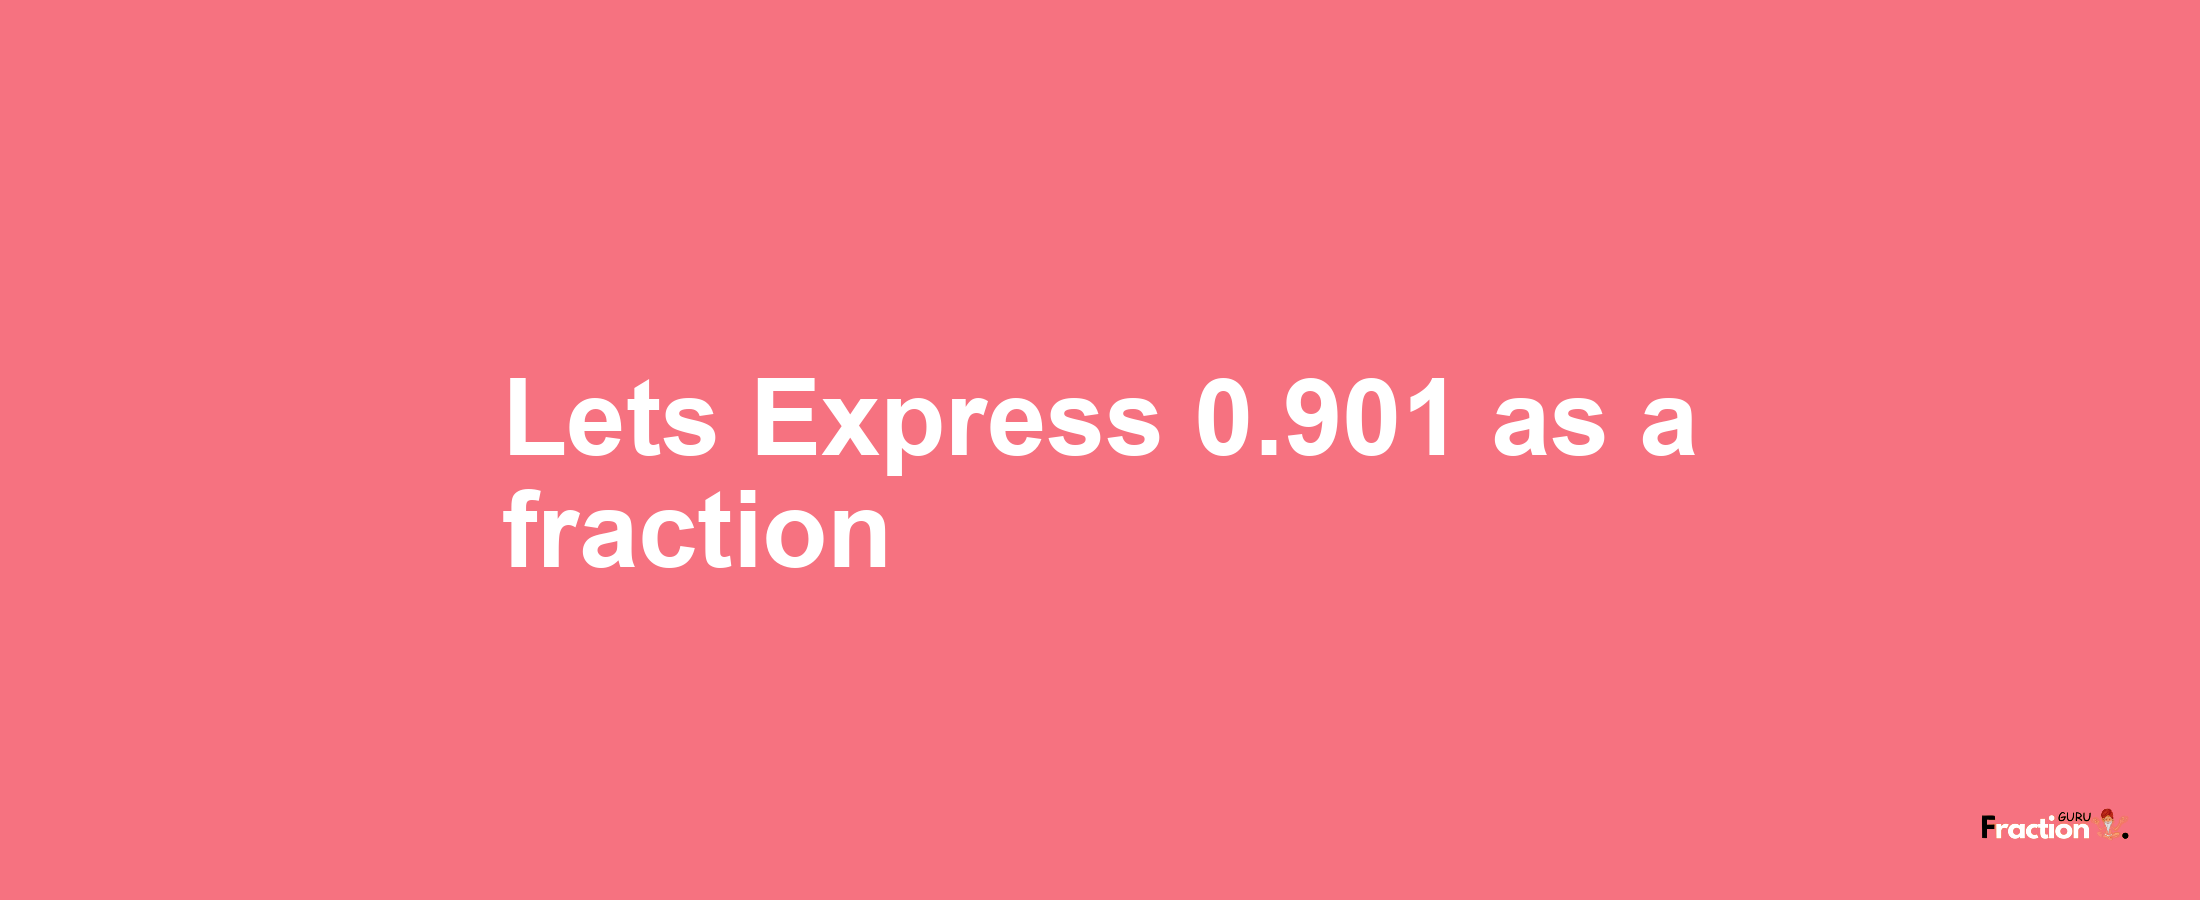 Lets Express 0.901 as afraction